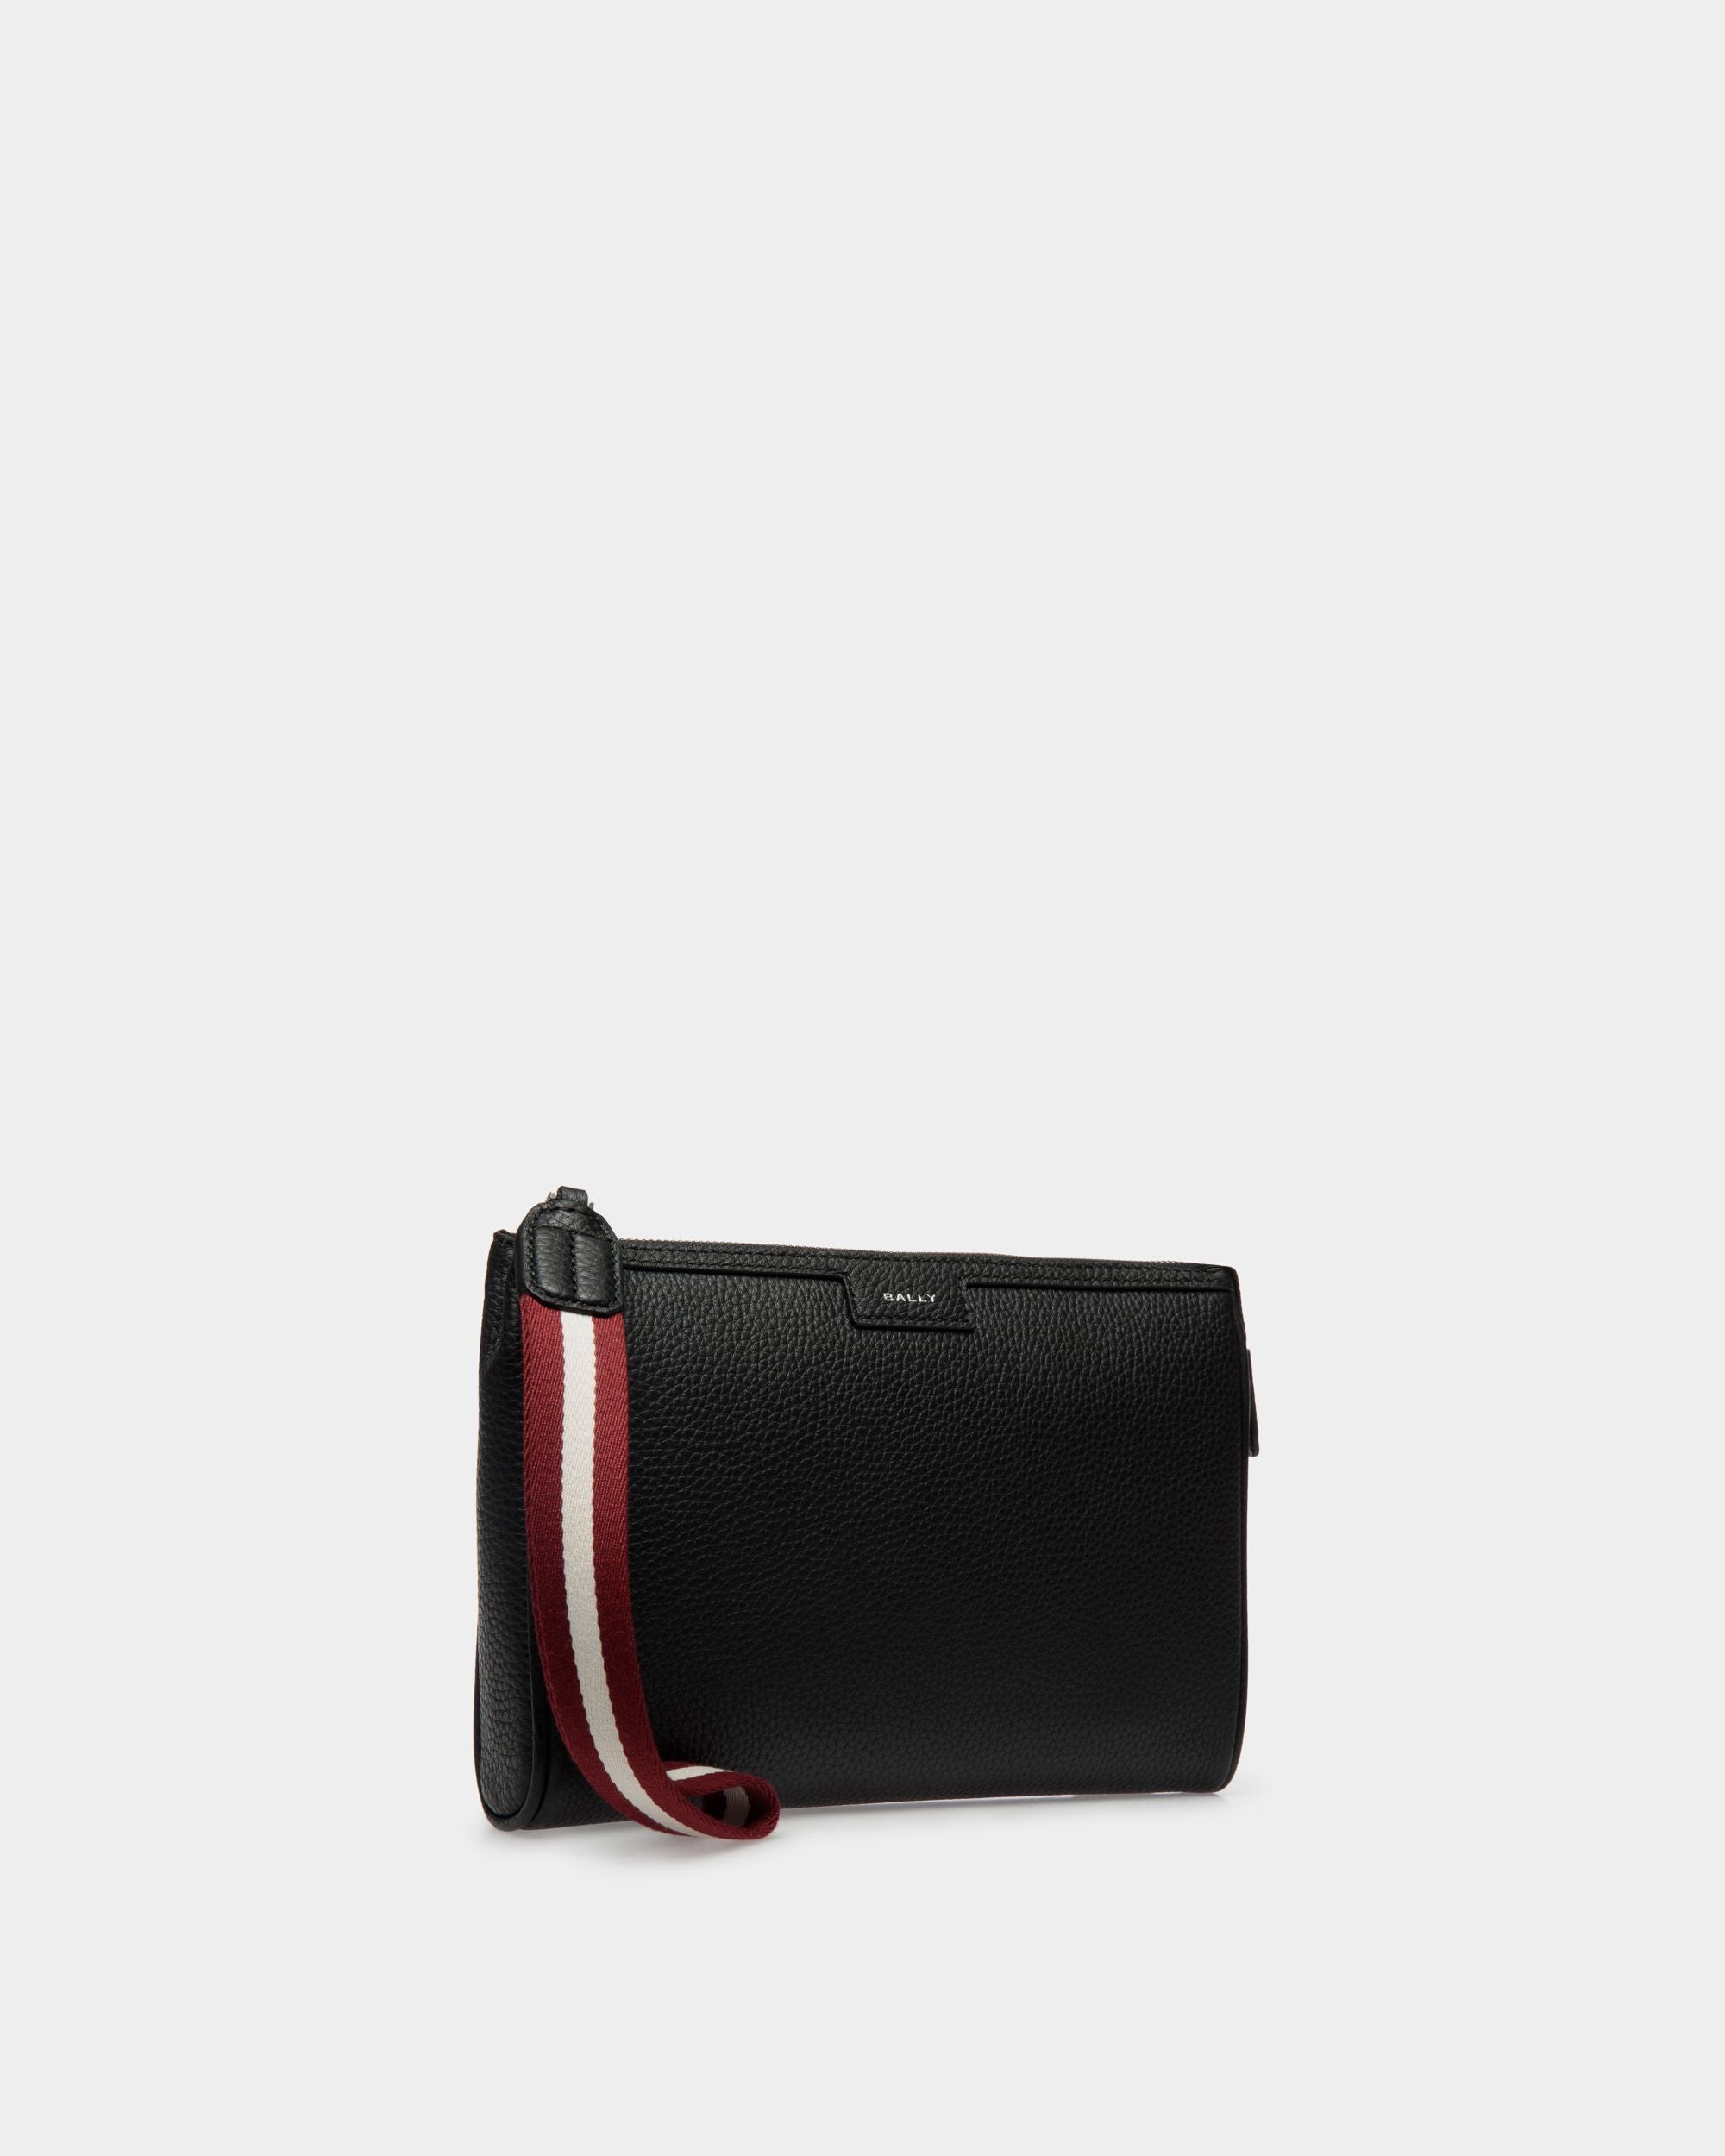 Code | Men's Pouch in Black Grained Leather | Bally | Still Life 3/4 Front